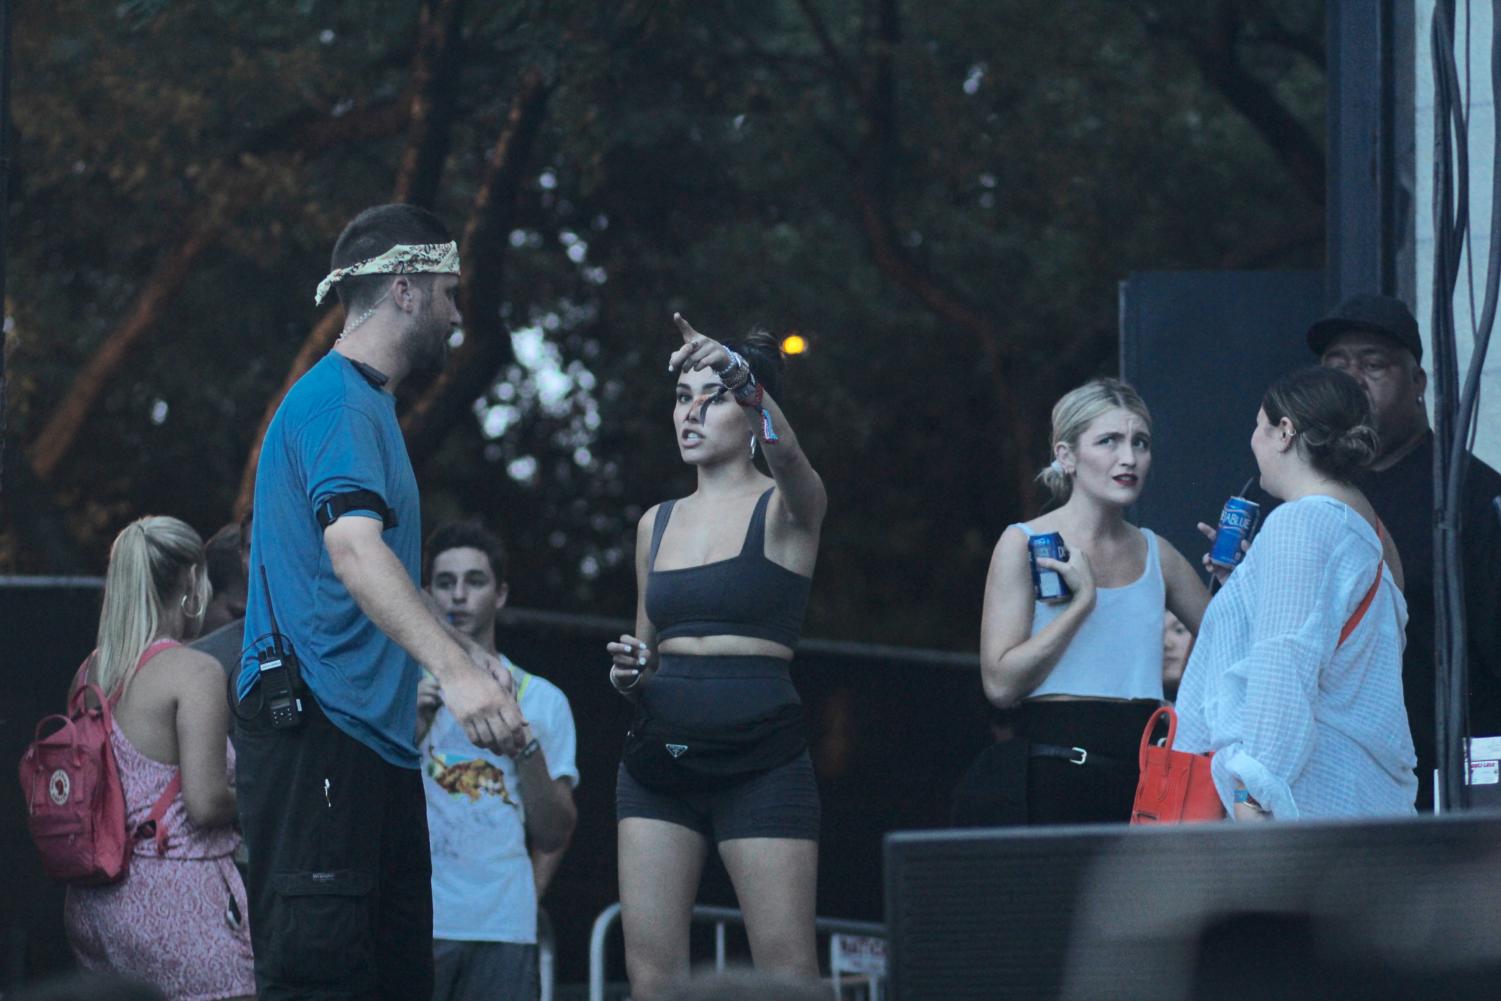 Madison Beer, who performed earlier in the festival, watches Medasin's set from the side of the stage